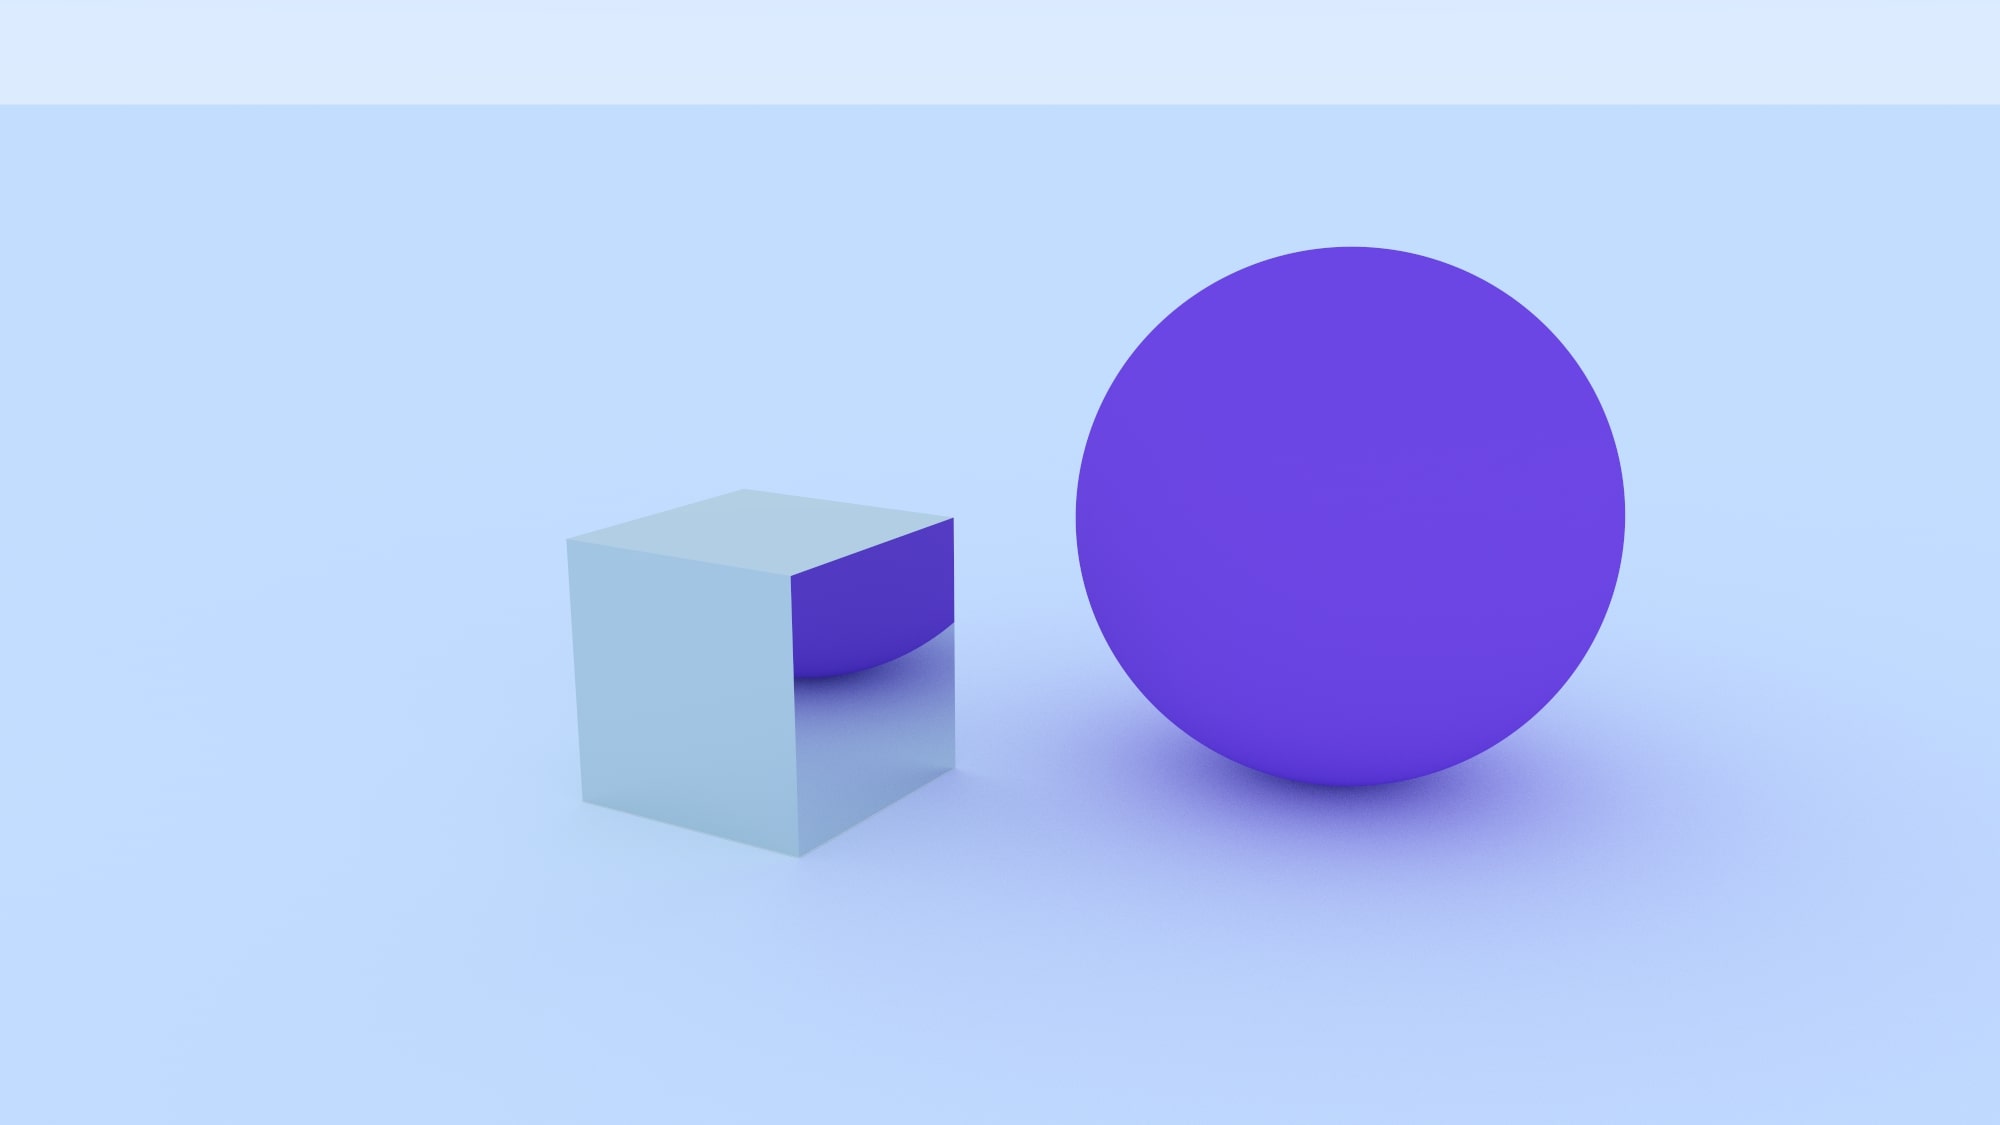 Ray tracer example image with different shapes (triangles, sphere and infinite plane)